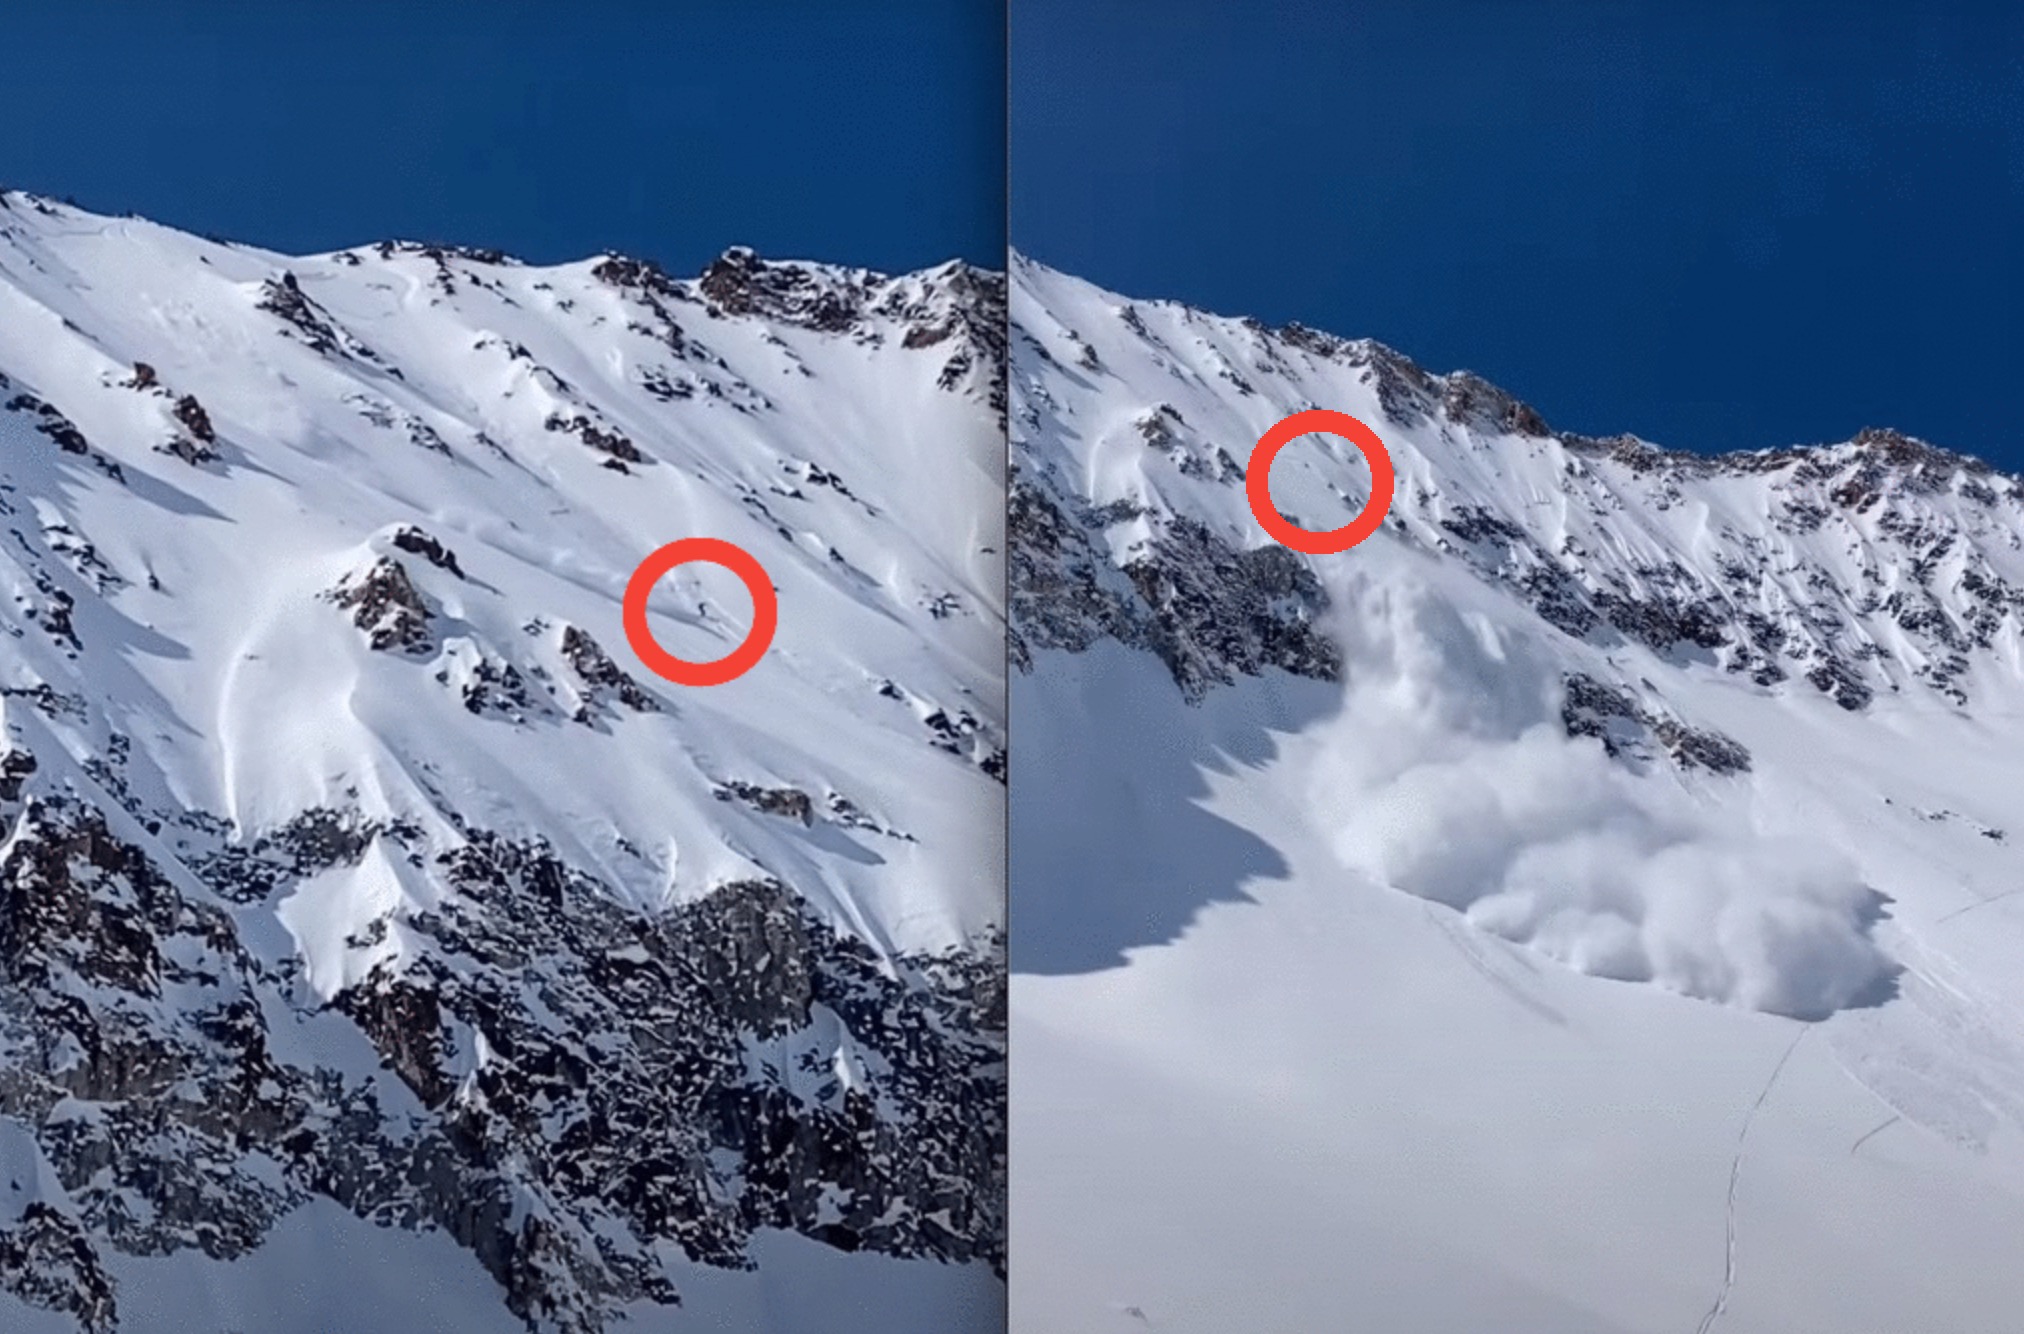 VIDEO: Skier Nearly Swept Over Cliffs By Avalanche